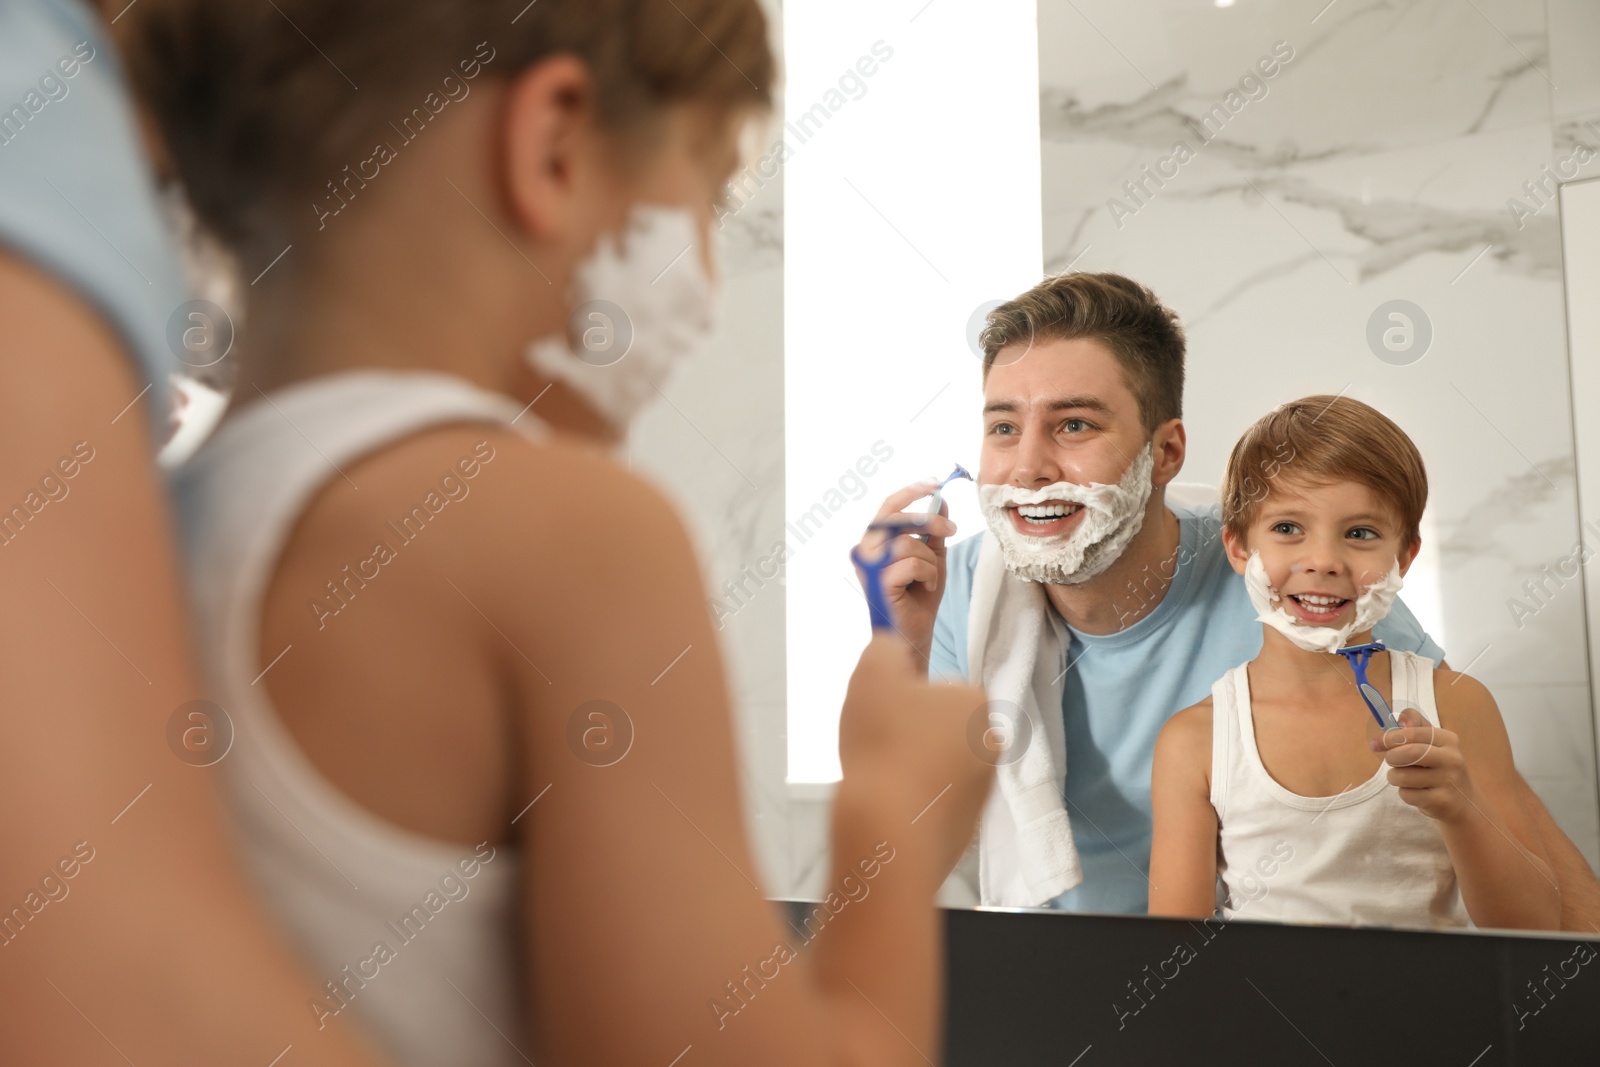 Photo of Dad shaving and son imitating him in bathroom